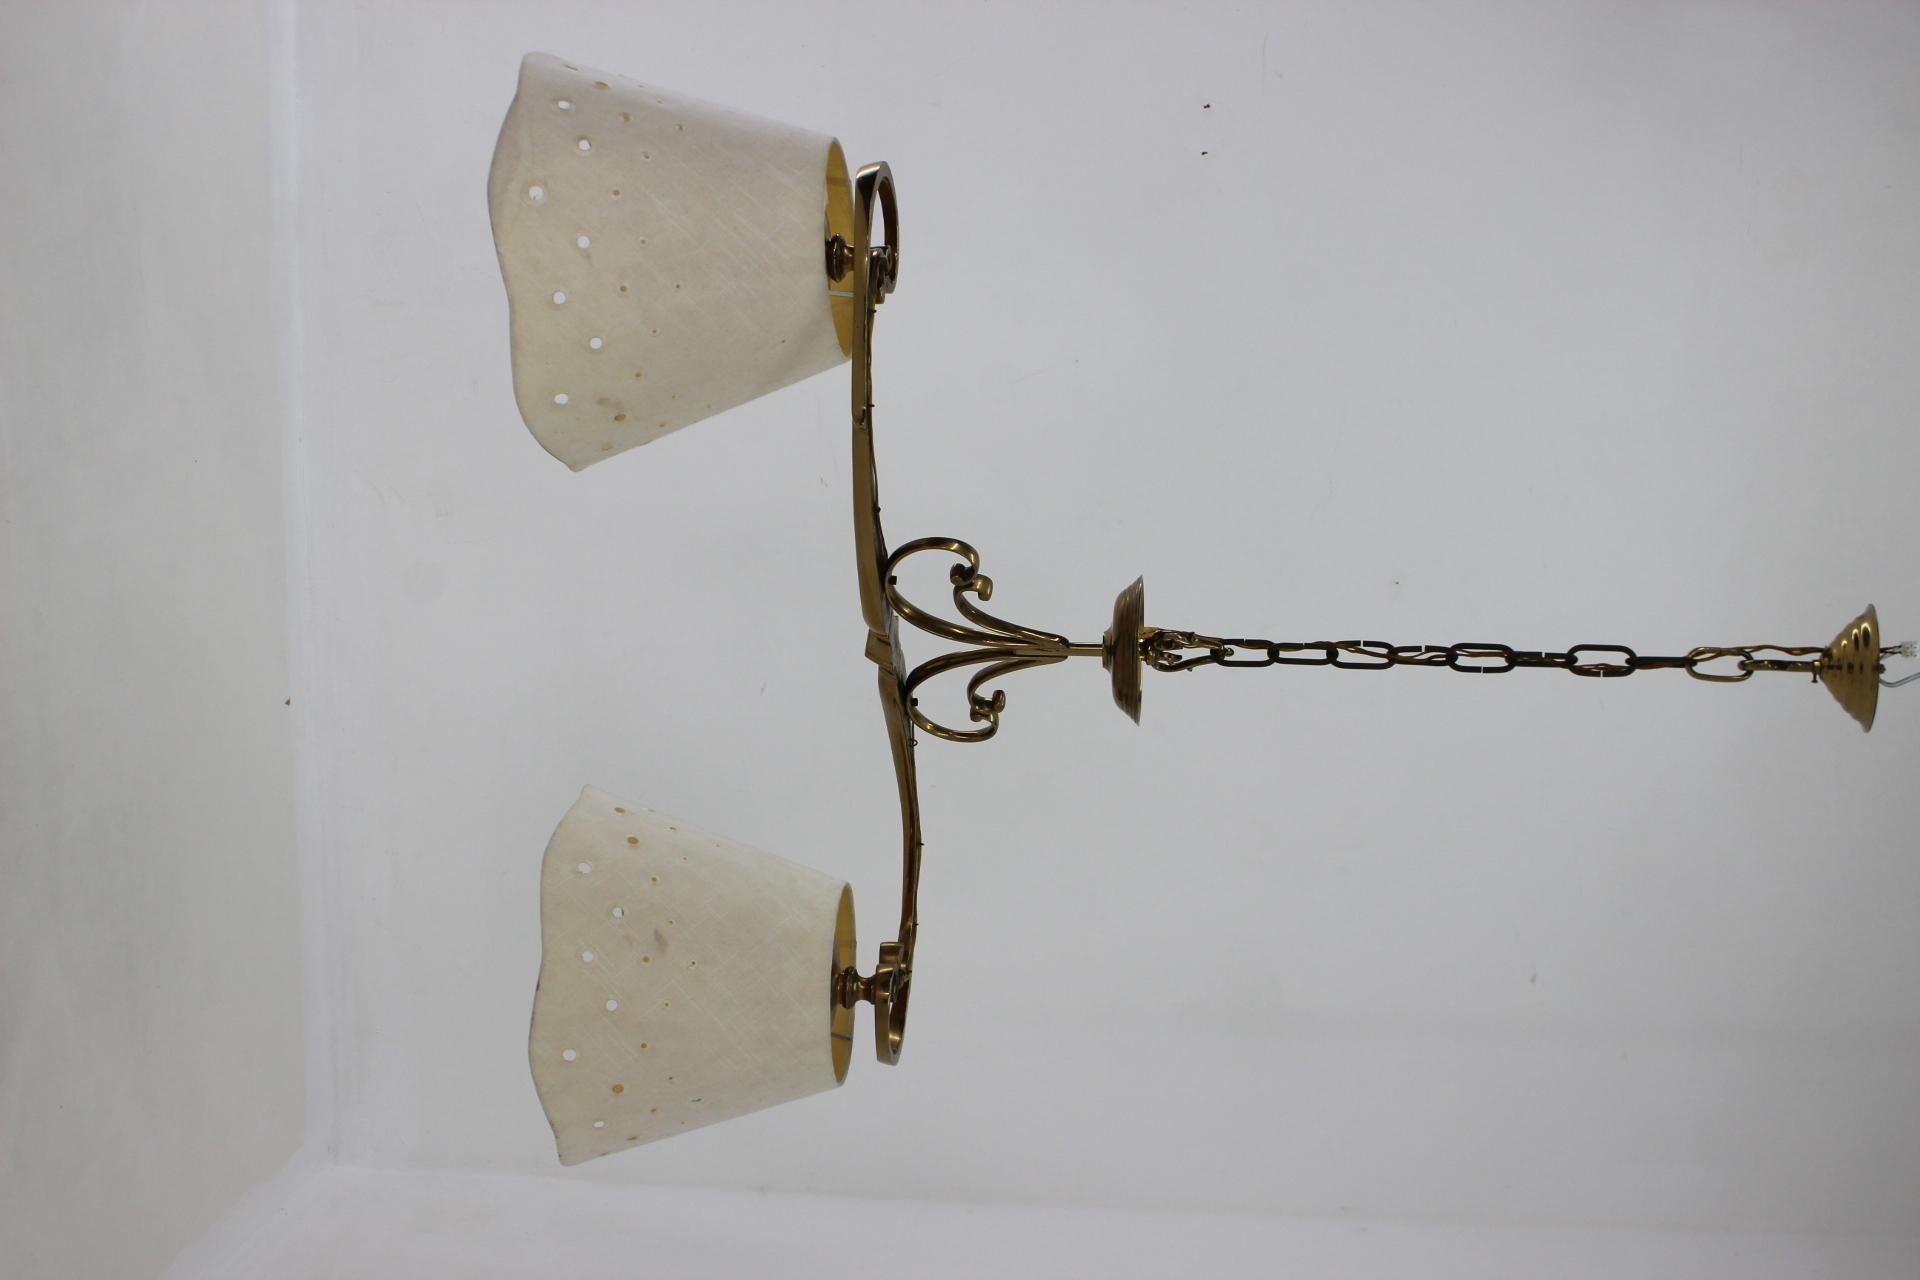 - Good original condition with signs of use.
- Fabric lamp shades with some dirty spots.